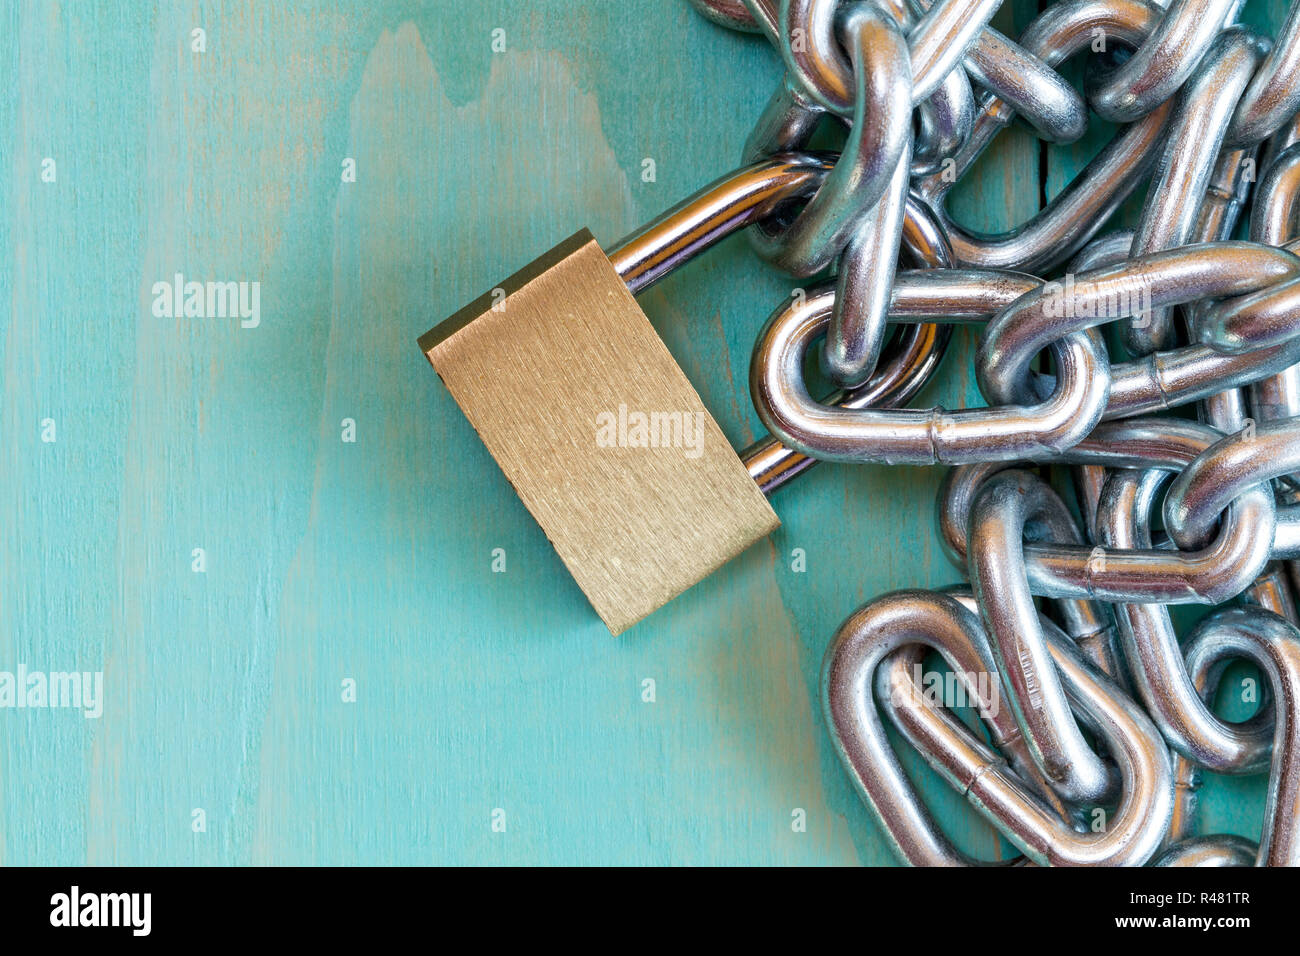 Padlock on the blue wooden background Stock Photo